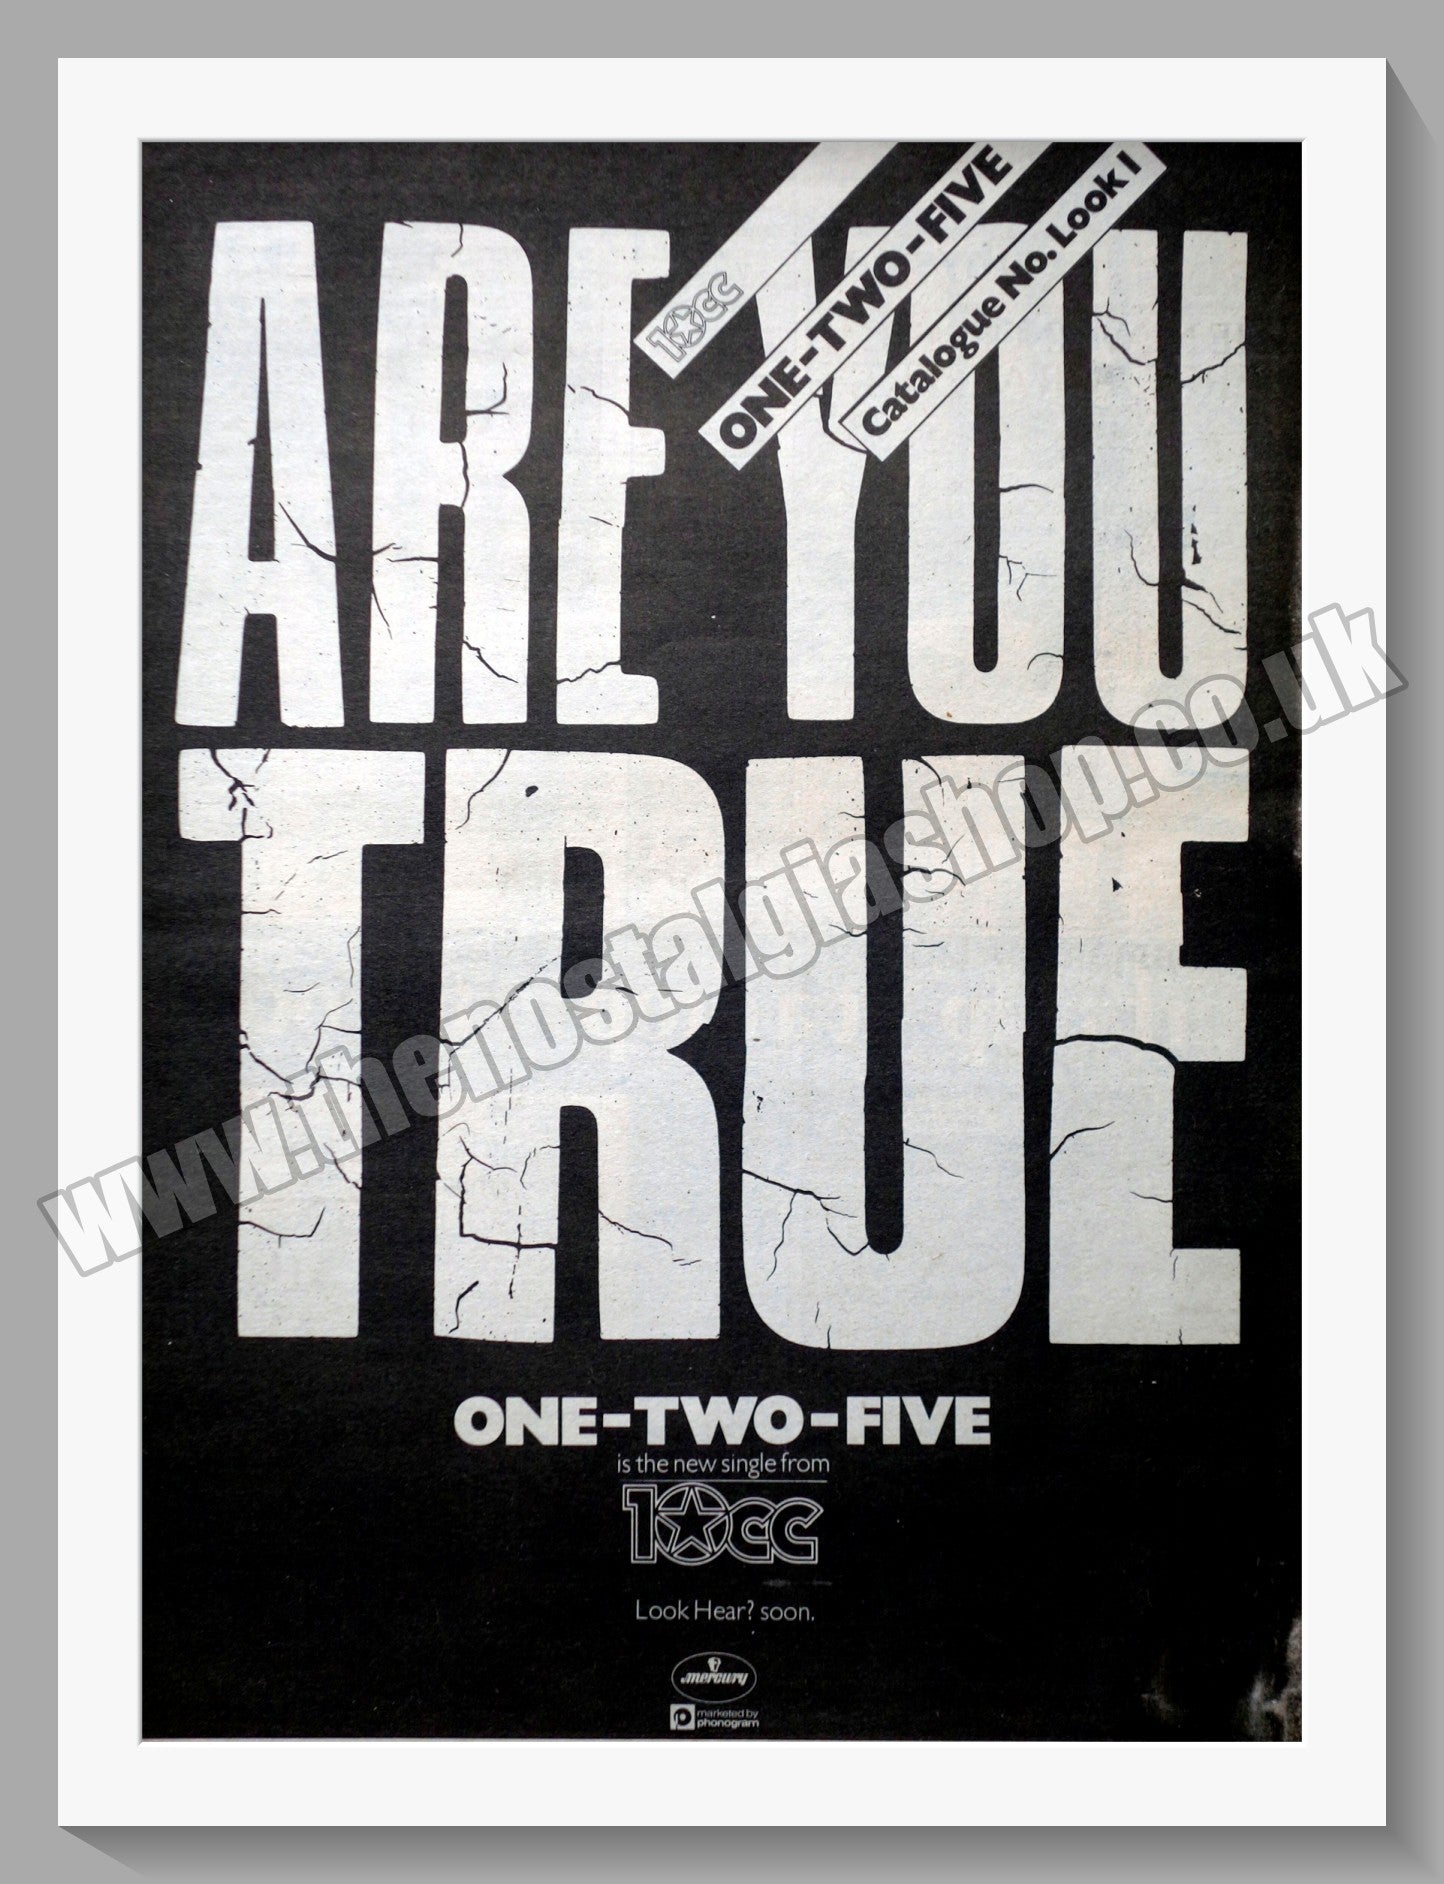 10cc One-Two-Five. Original Advert 1980 (ref AD14217)